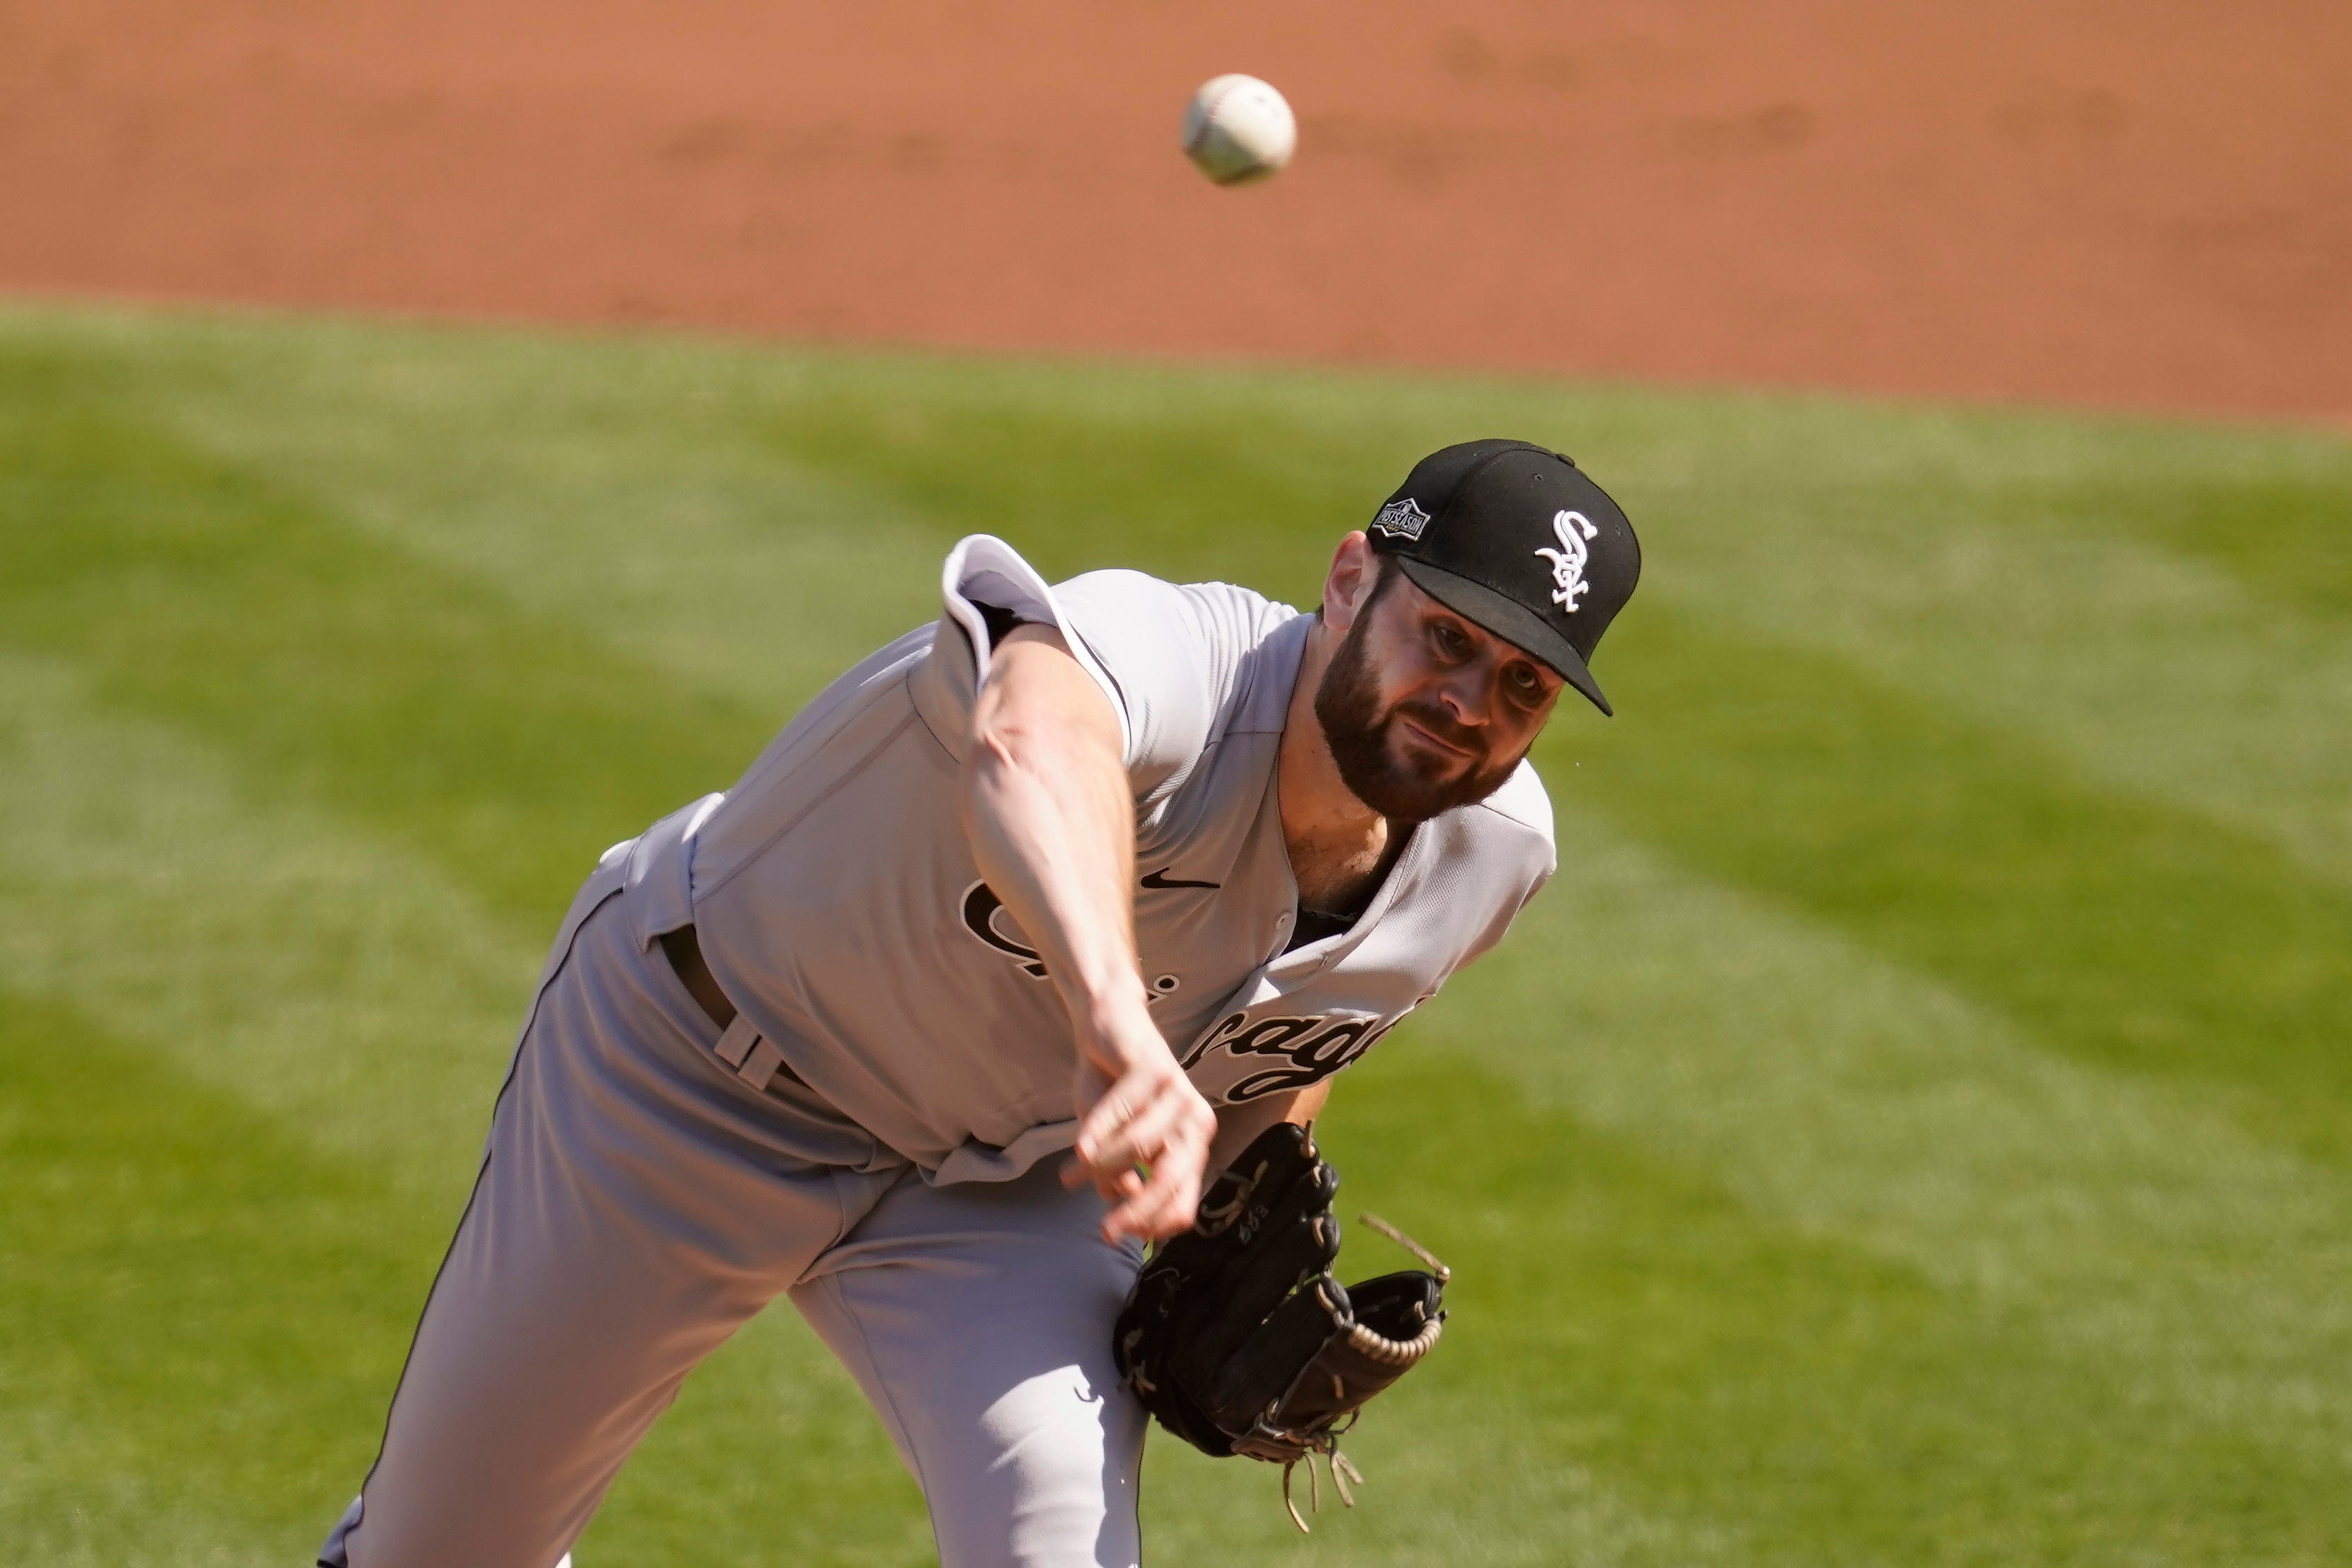 Chicago White Sox ACE